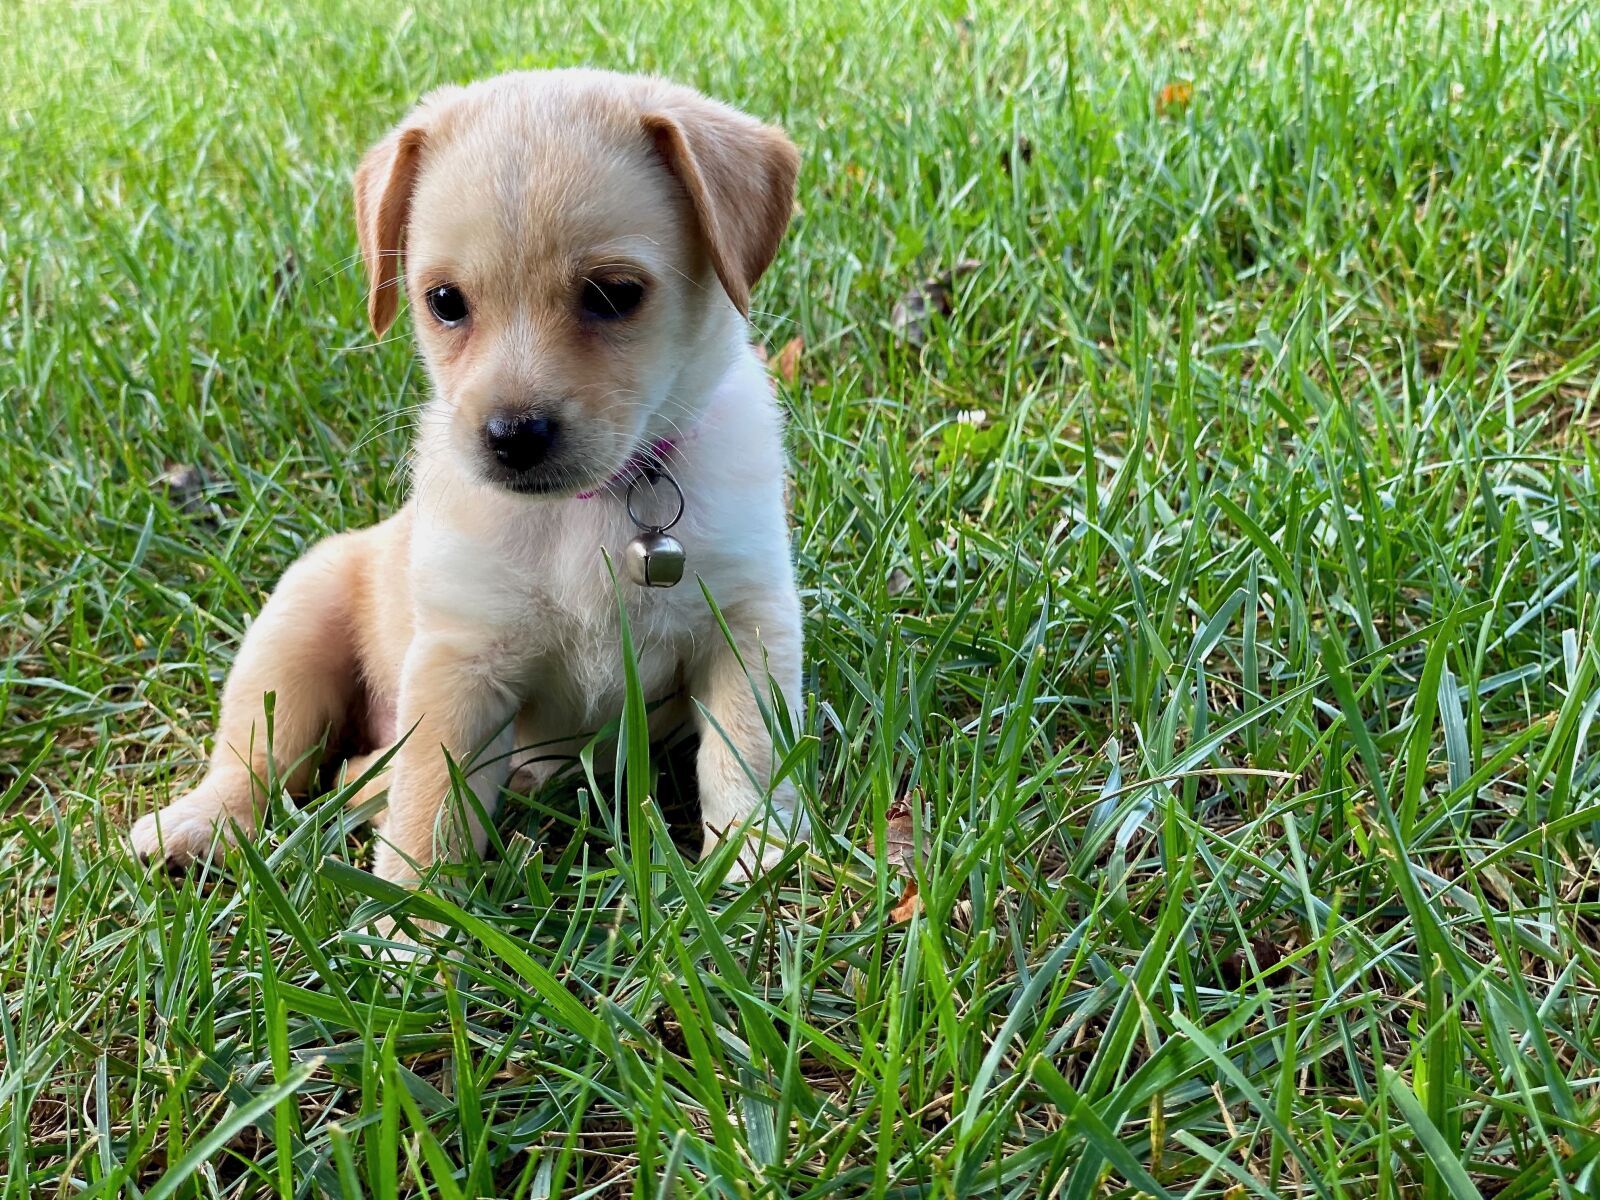 Apple iPhone 11 Pro sample photo. Puppy, grass, dog photography